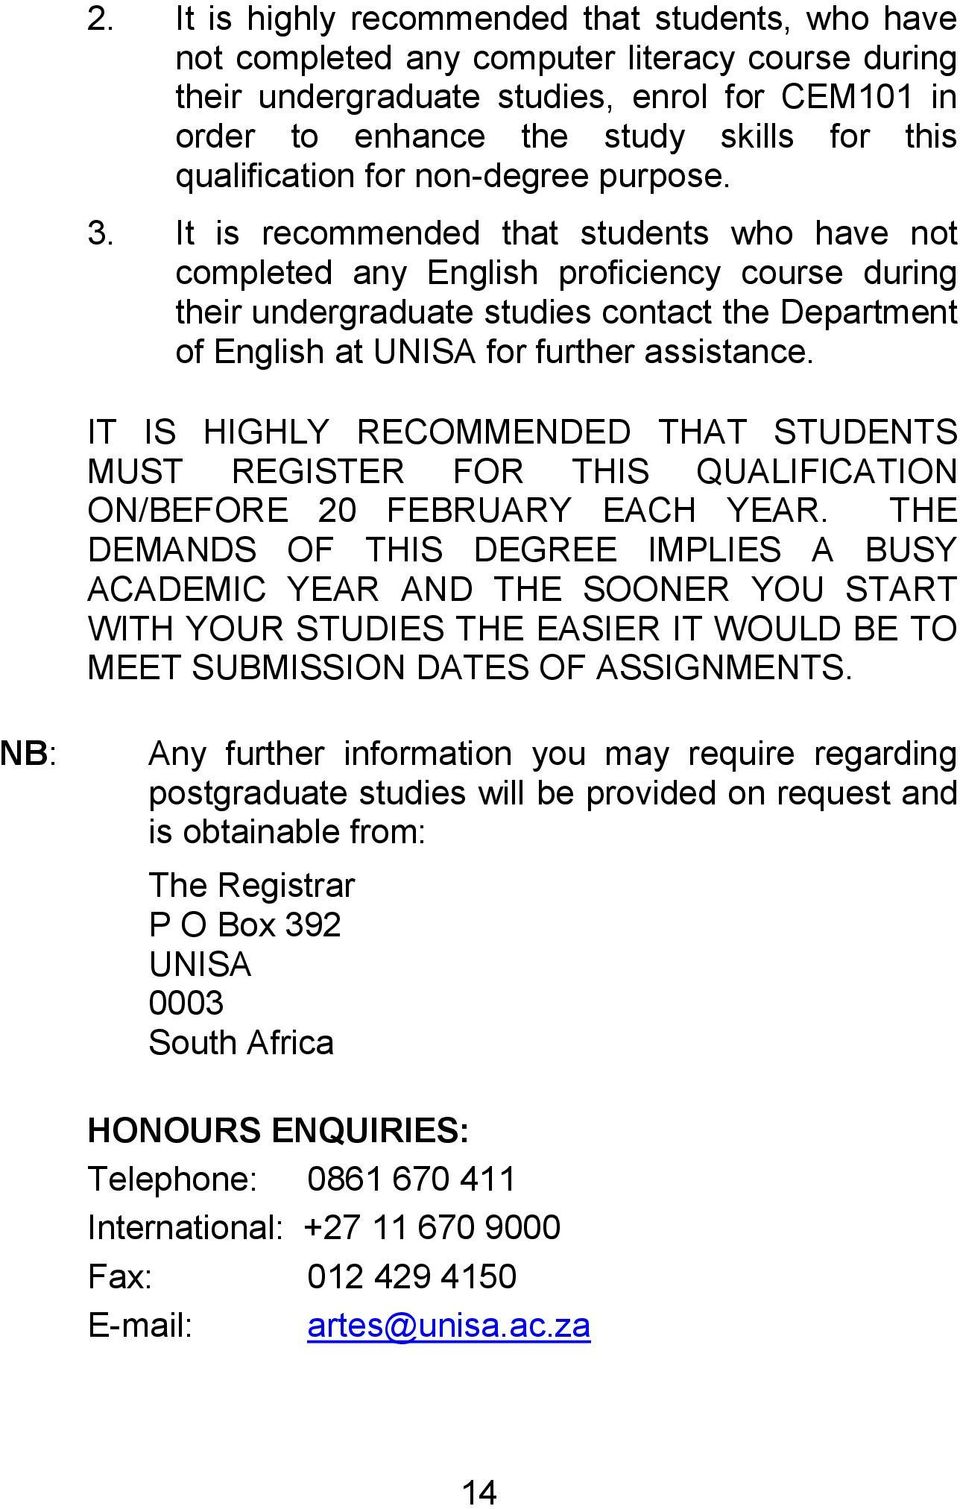 It is recommended that students who have not completed any English proficiency course during their undergraduate studies contact the Department of English at UNISA for further assistance.